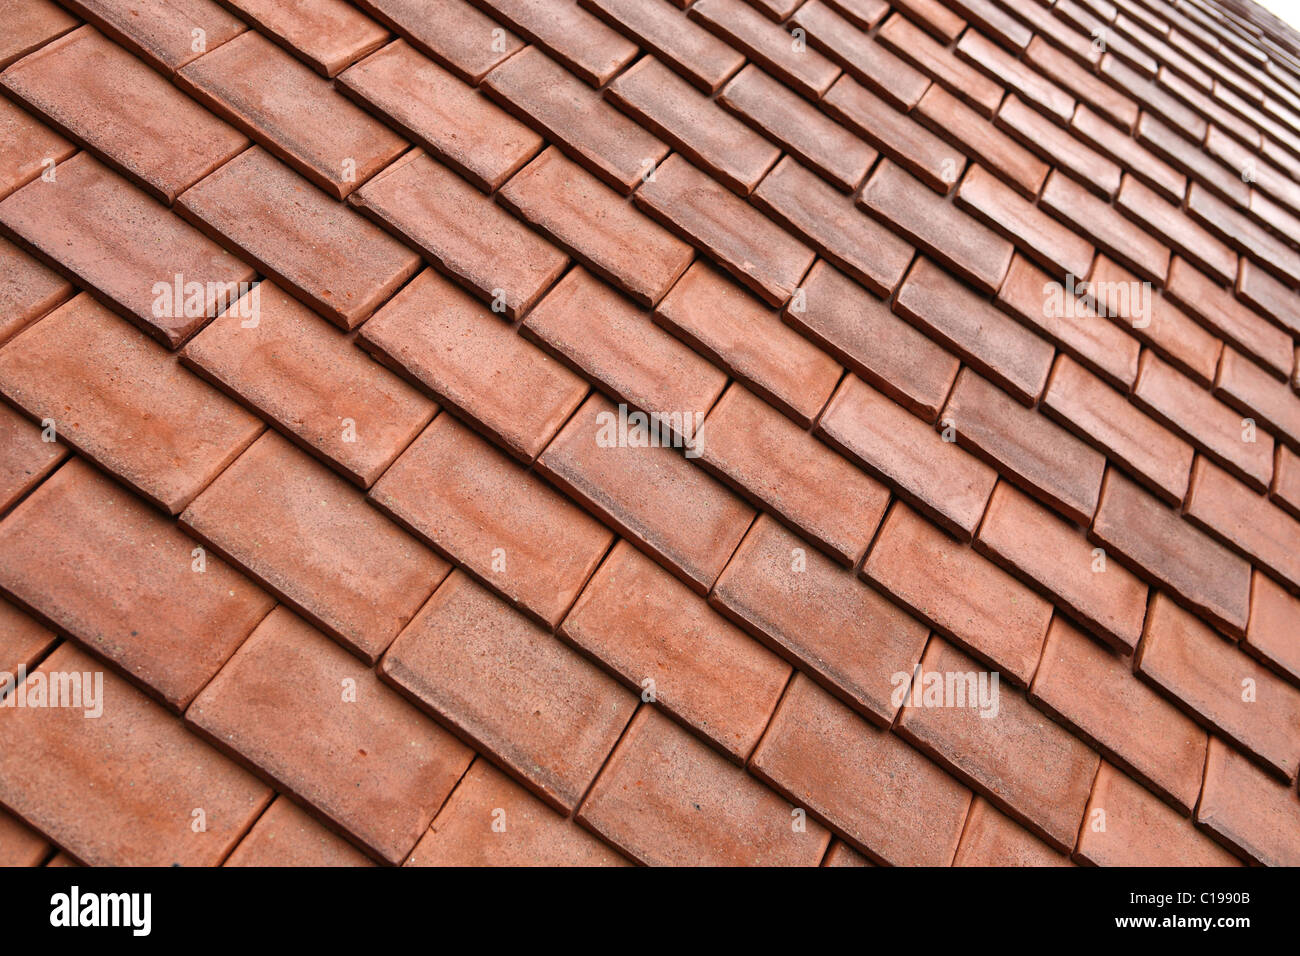 Red roof tiles Stock Photo